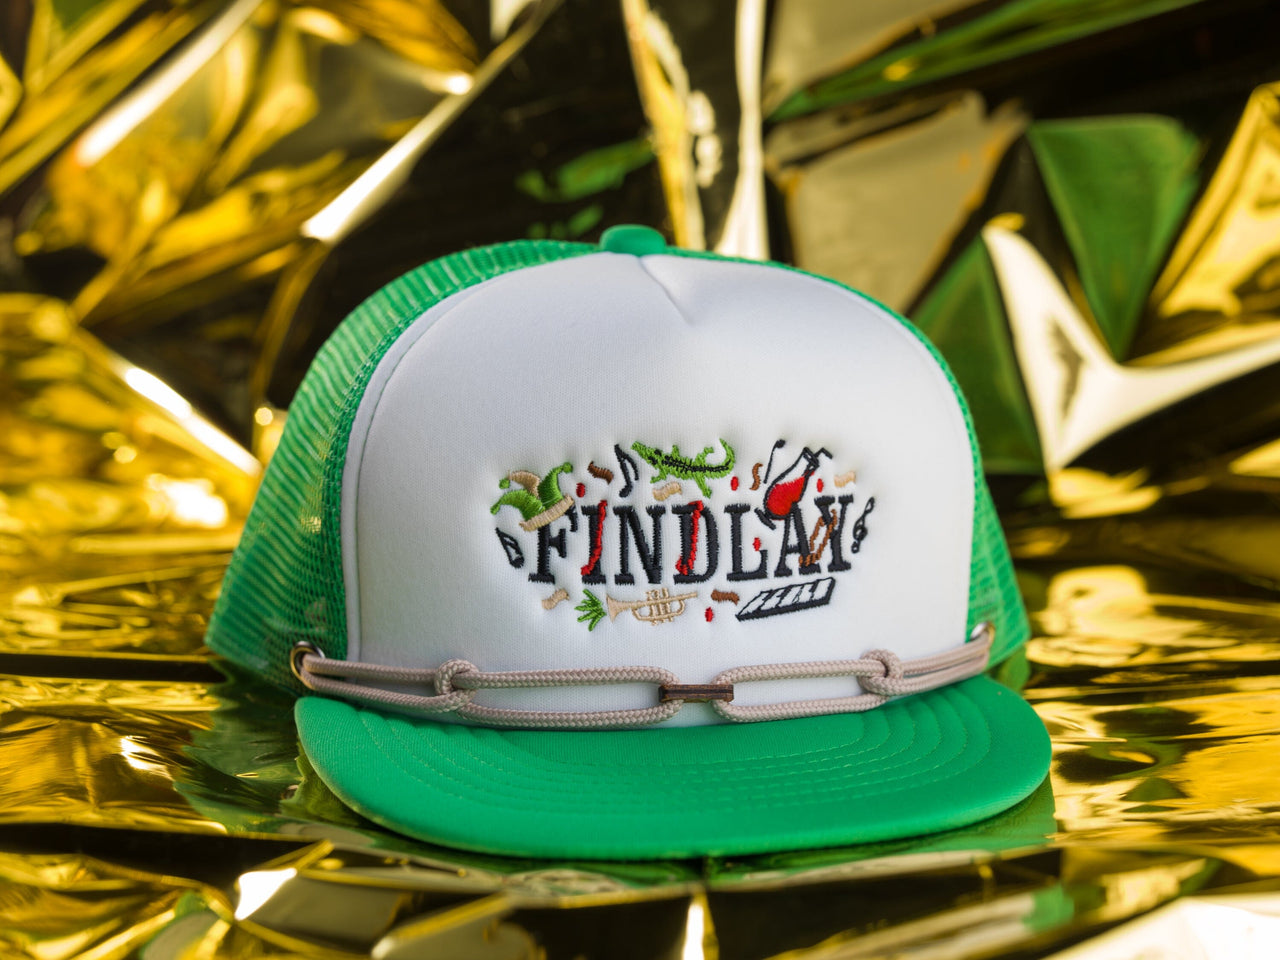 Ethan's Mardi Gras (1 of 24) Limited Edition Hats Findlay Hats 